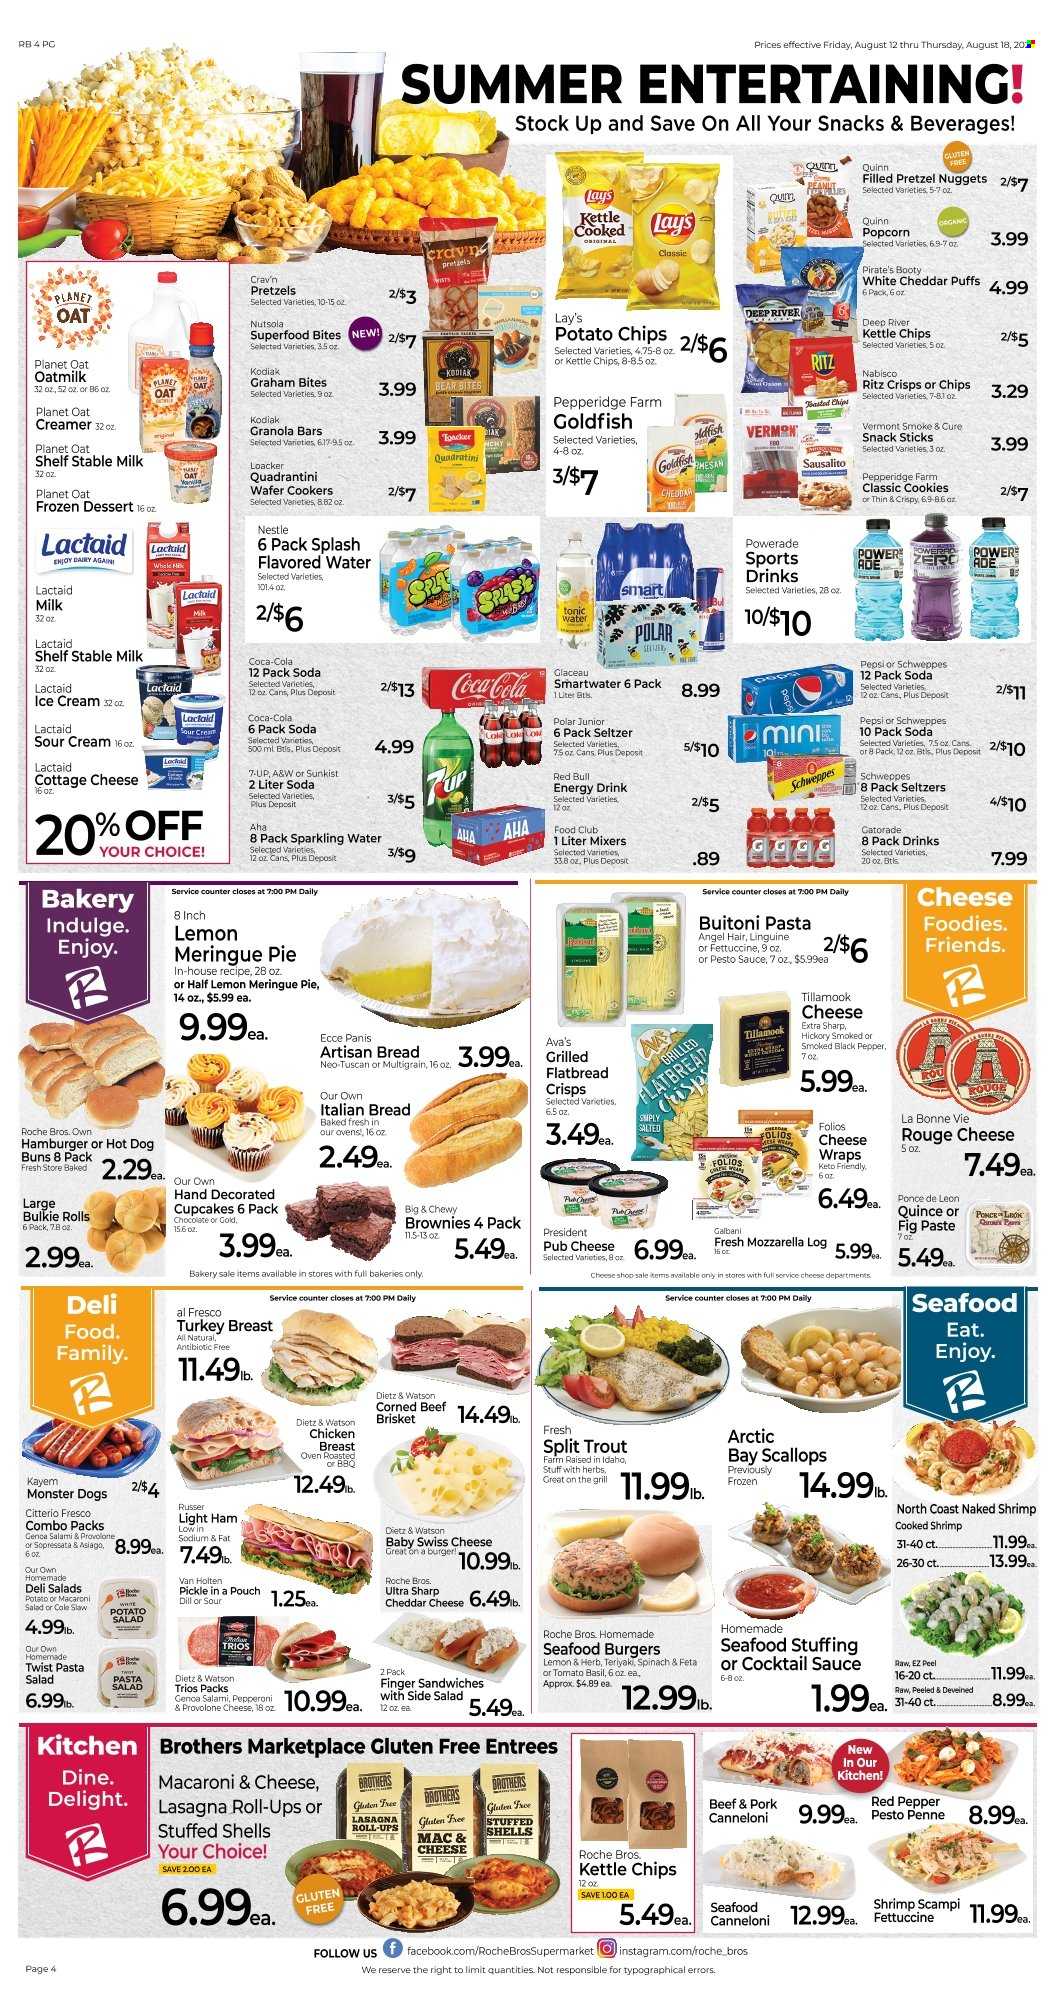 thumbnail - Roche Bros. Flyer - 08/12/2022 - 08/18/2022 - Sales products - bread, pretzels, buns, flatbread, wraps, cupcake, puffs, brownies, quince, scallops, trout, seafood, shrimps, sandwich, nuggets, pasta, lasagna meal, Buitoni, salami, ham, Dietz & Watson, pepperoni, potato salad, macaroni salad, pasta salad, corned beef, asiago, cottage cheese, Lactaid, mozzarella, swiss cheese, pub cheese, Président, Galbani, Provolone, milk, oat milk, sour cream, creamer, ice cream, cookies, Nestlé, wafers, snack, RITZ, potato chips, Lay’s, popcorn, Goldfish, granola bar, penne, dill, black pepper, cocktail sauce, peanuts, Coca-Cola, Schweppes, Powerade, Pepsi, energy drink, Monster, tonic, 7UP, Red Bull, A&W, Gatorade, seltzer water, flavored water, soda, sparkling water, Smartwater, turkey breast, beef meat. Page 4.